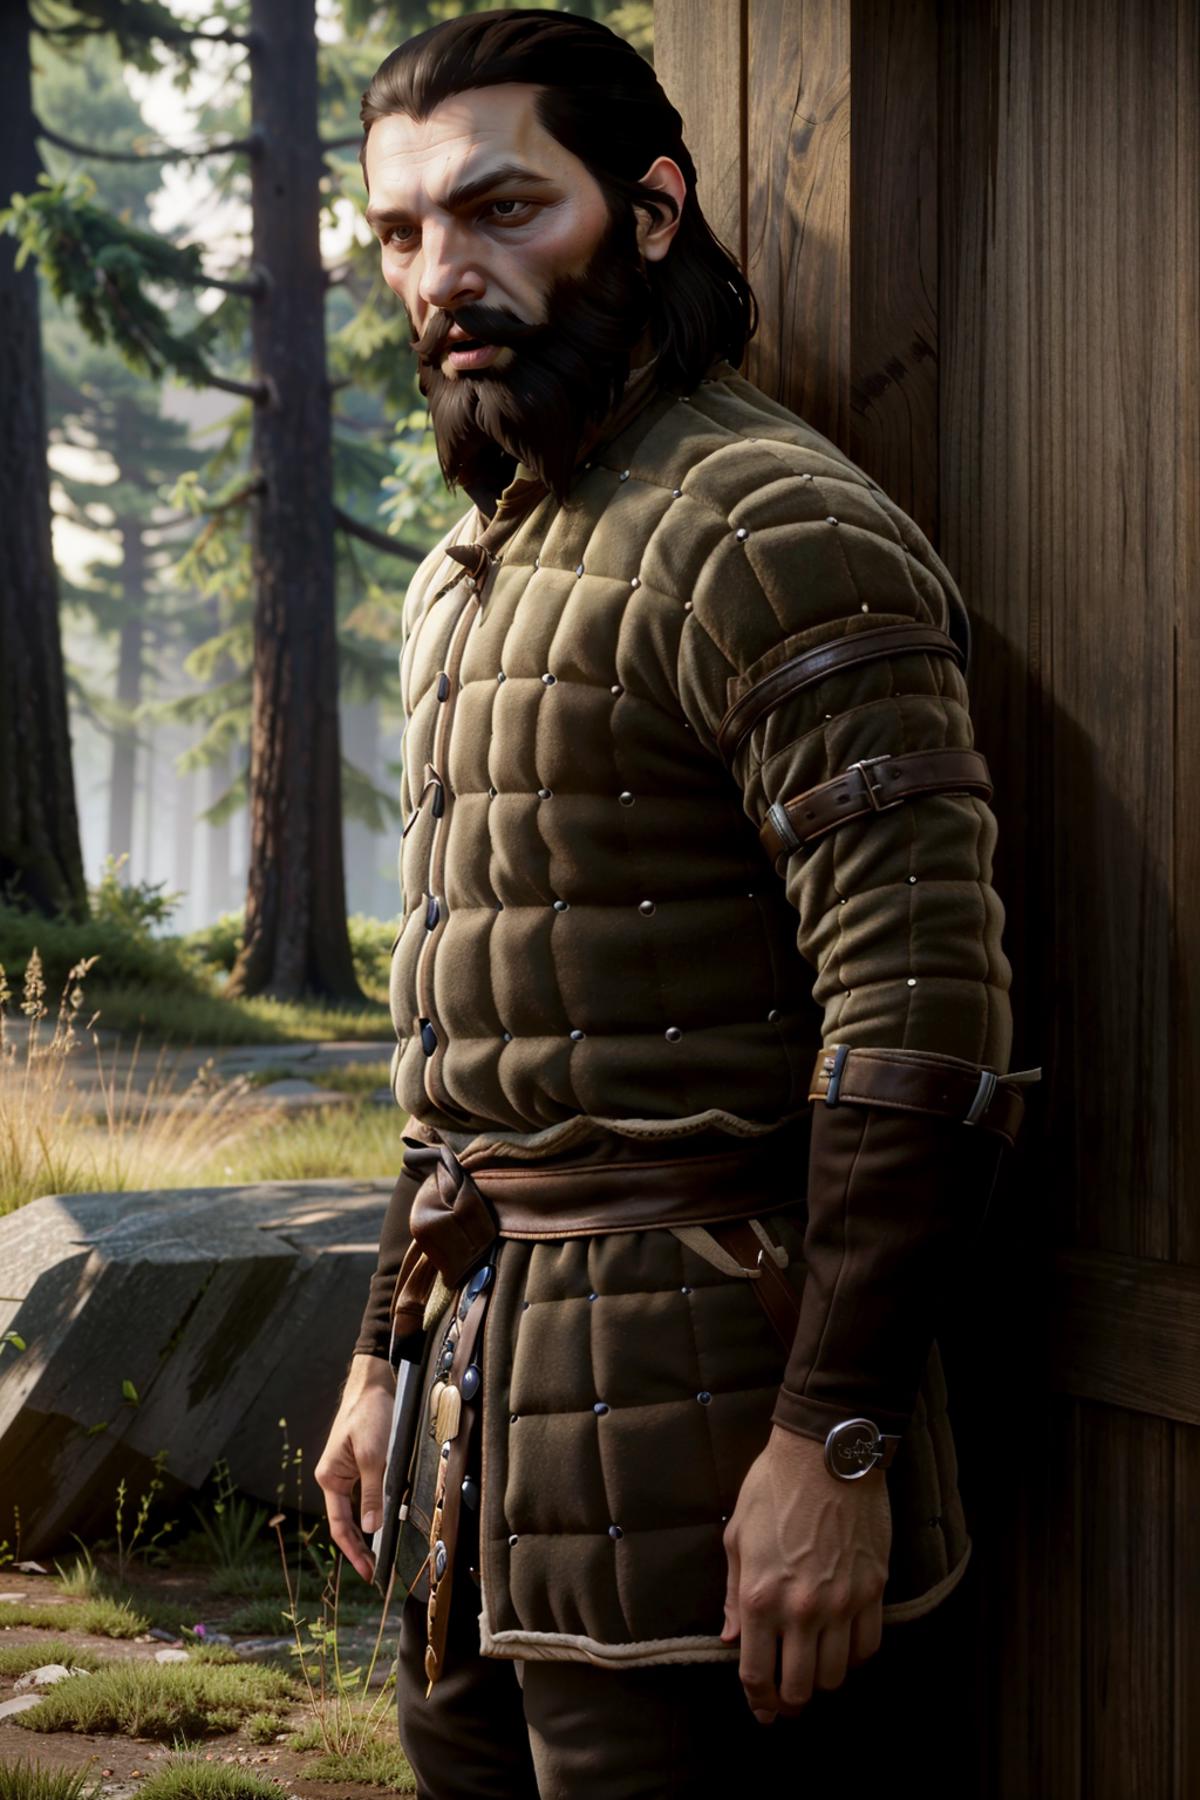 Blackwall from Dragon Age: Inquisition image by BloodRedKittie